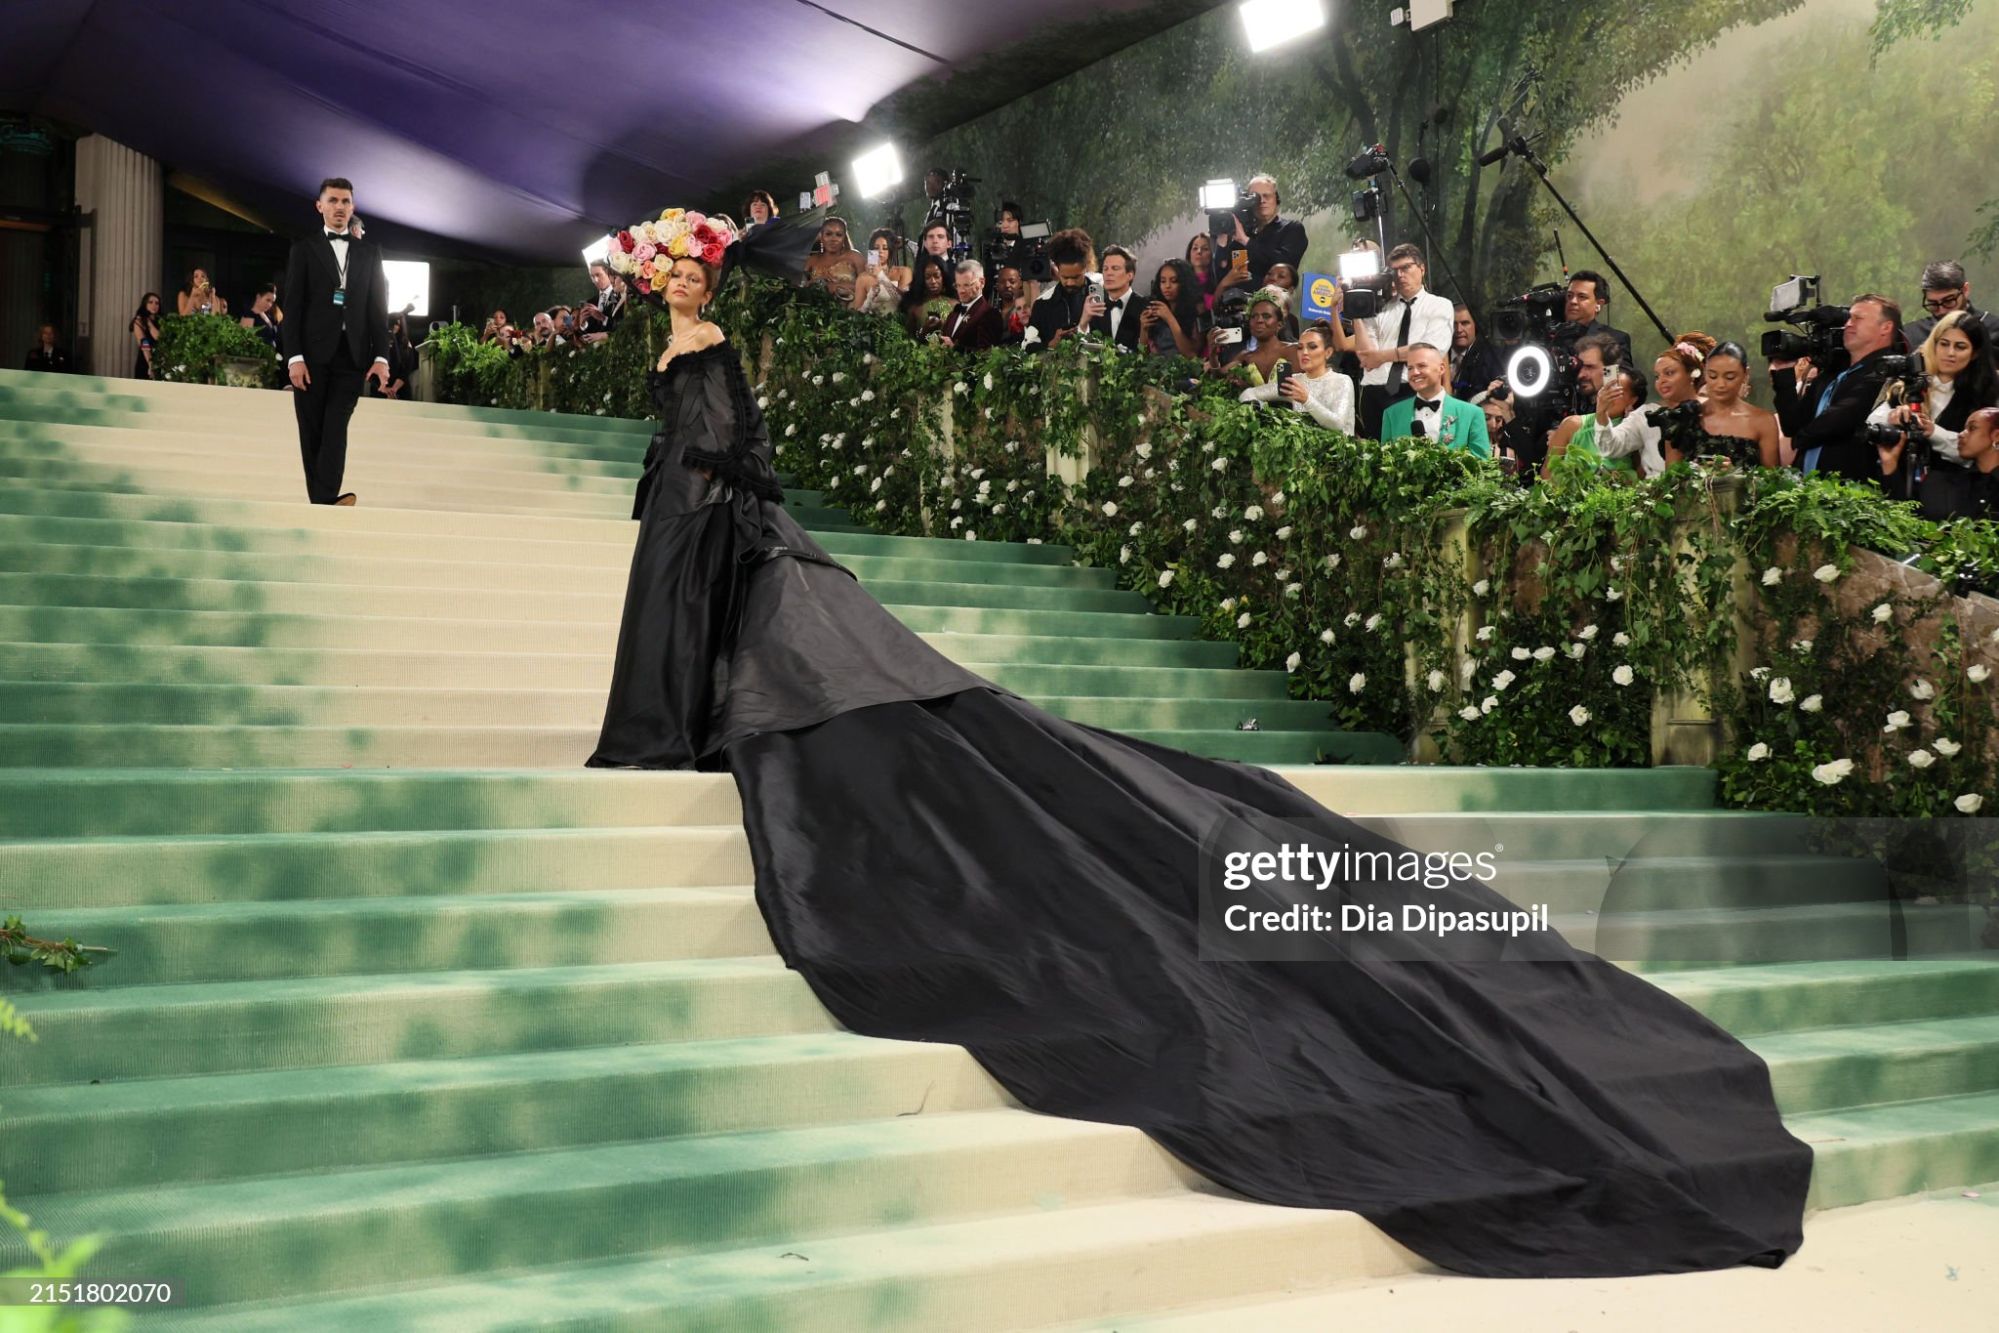 gettyimages-2151802070-2048x2048.jpg